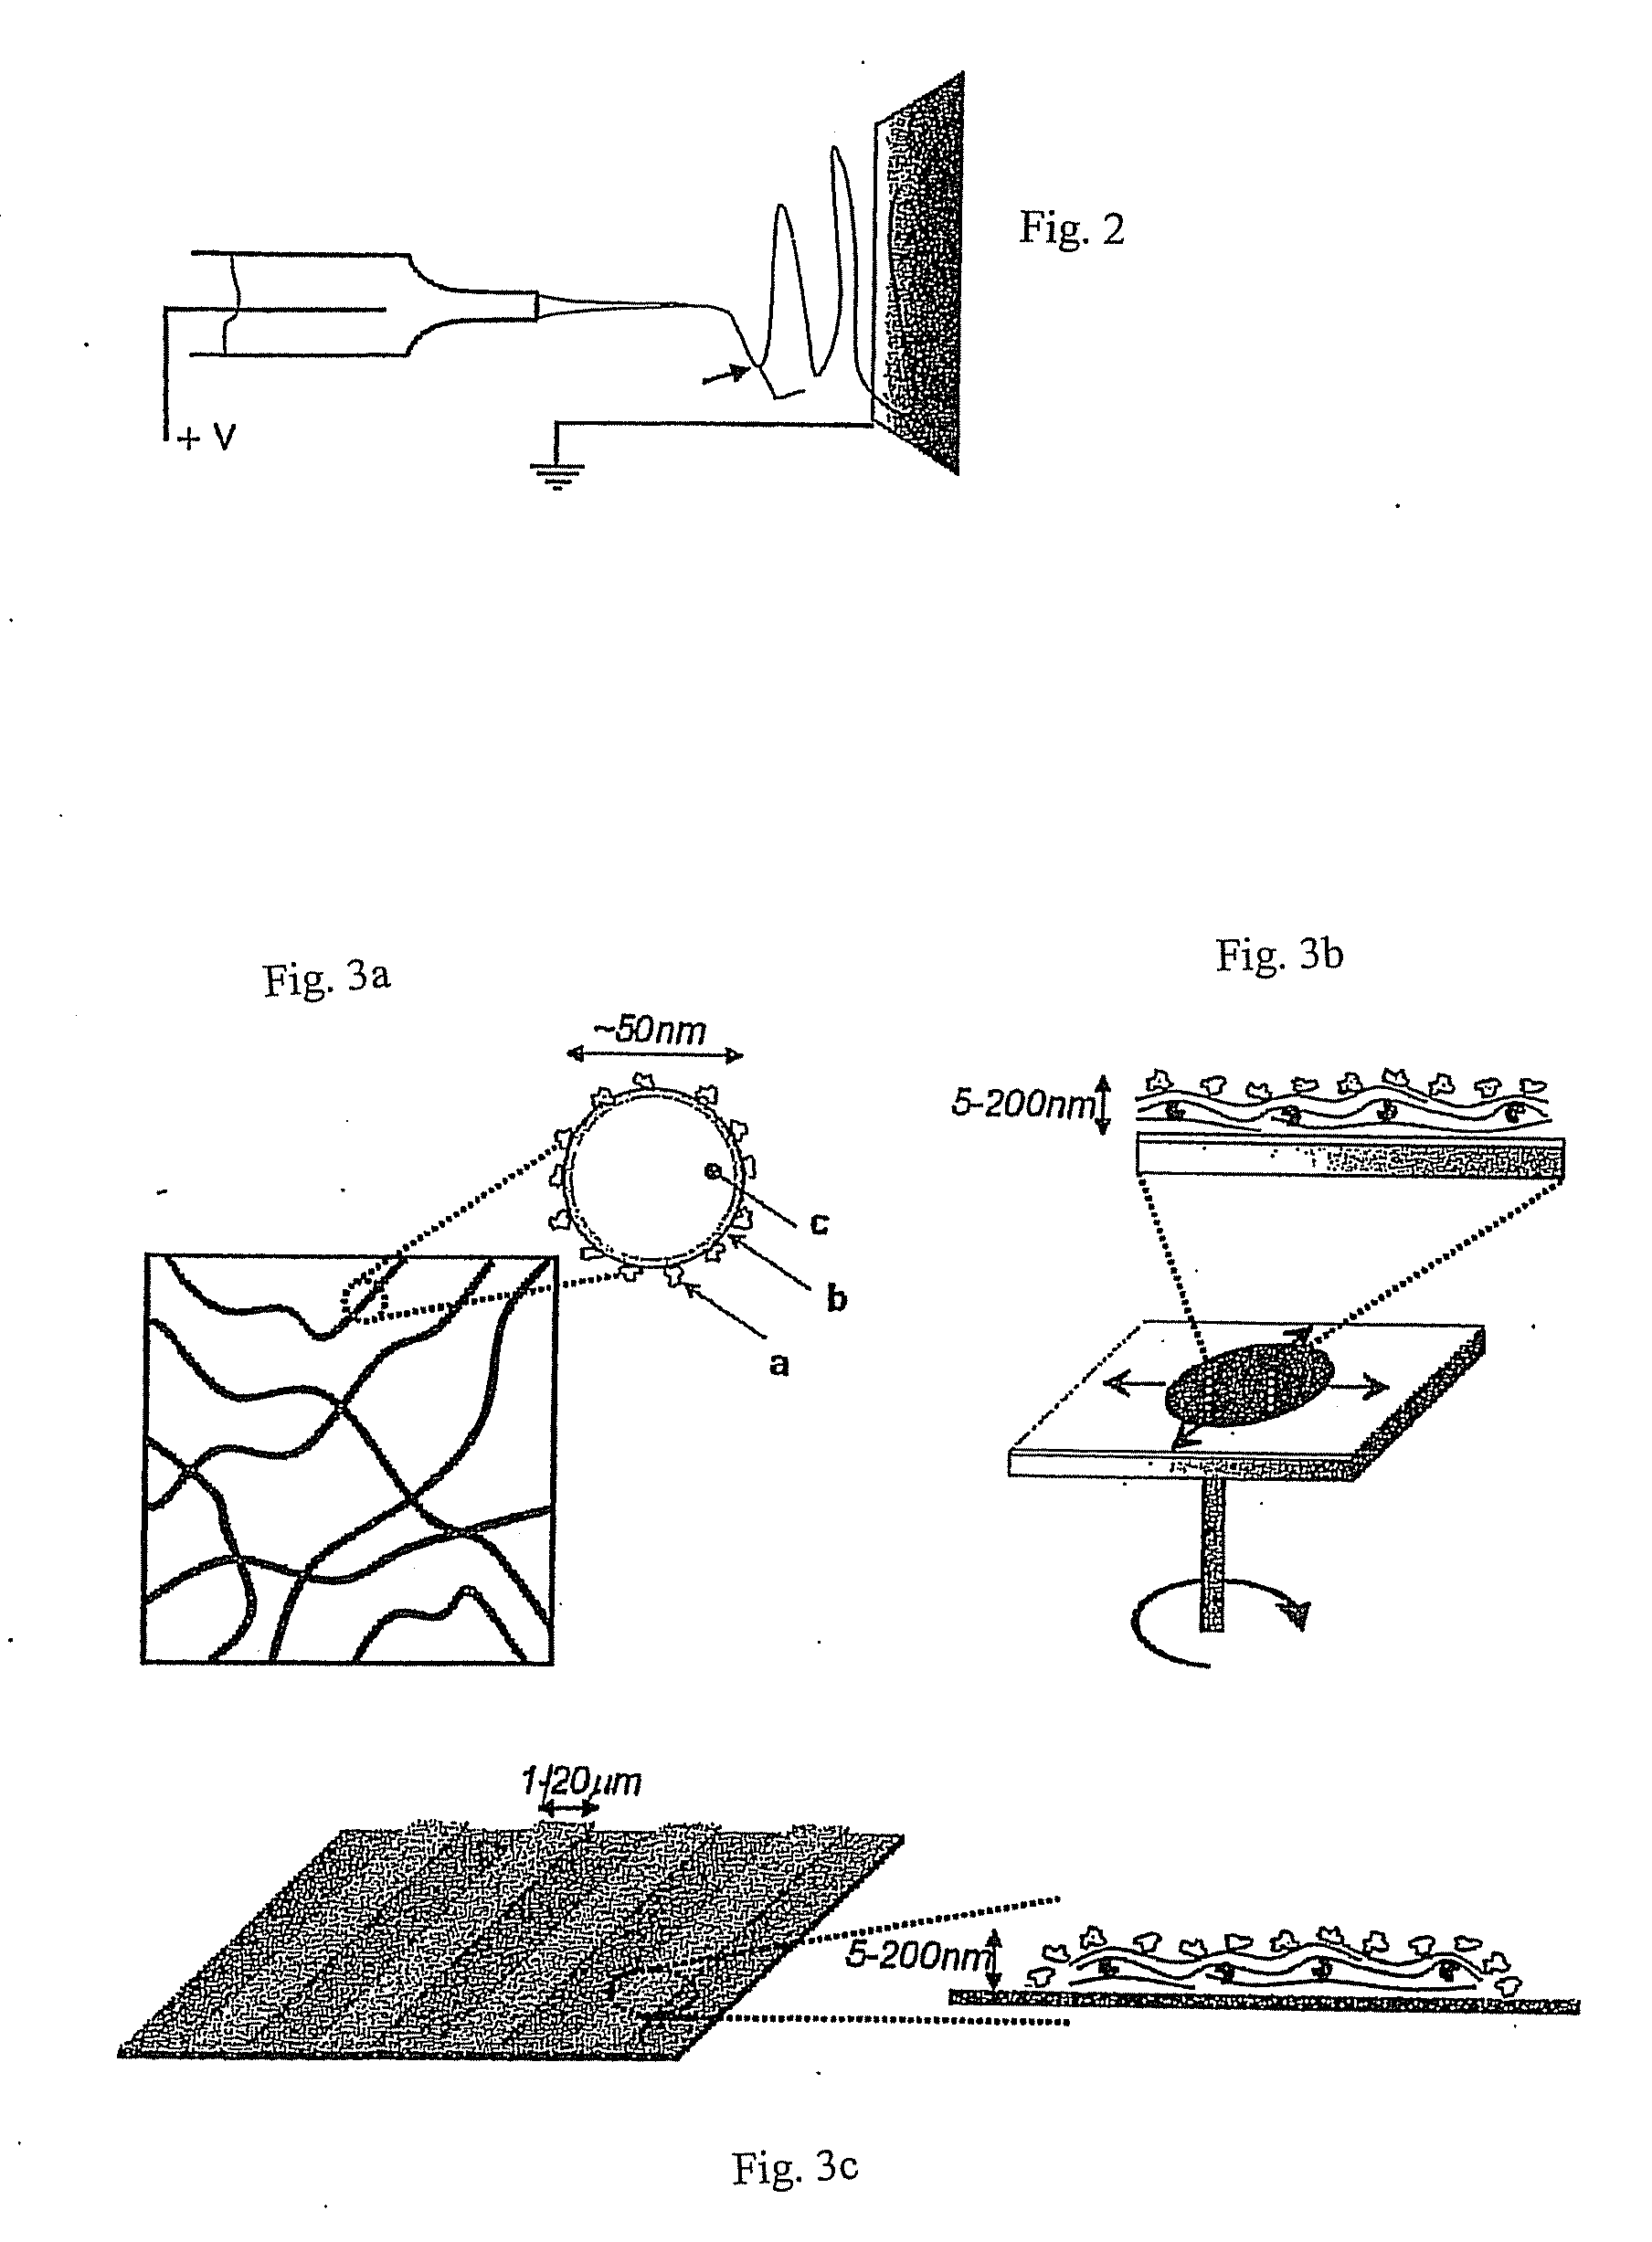 Dental materials, methods of making and using the same, and articles formed therefrom